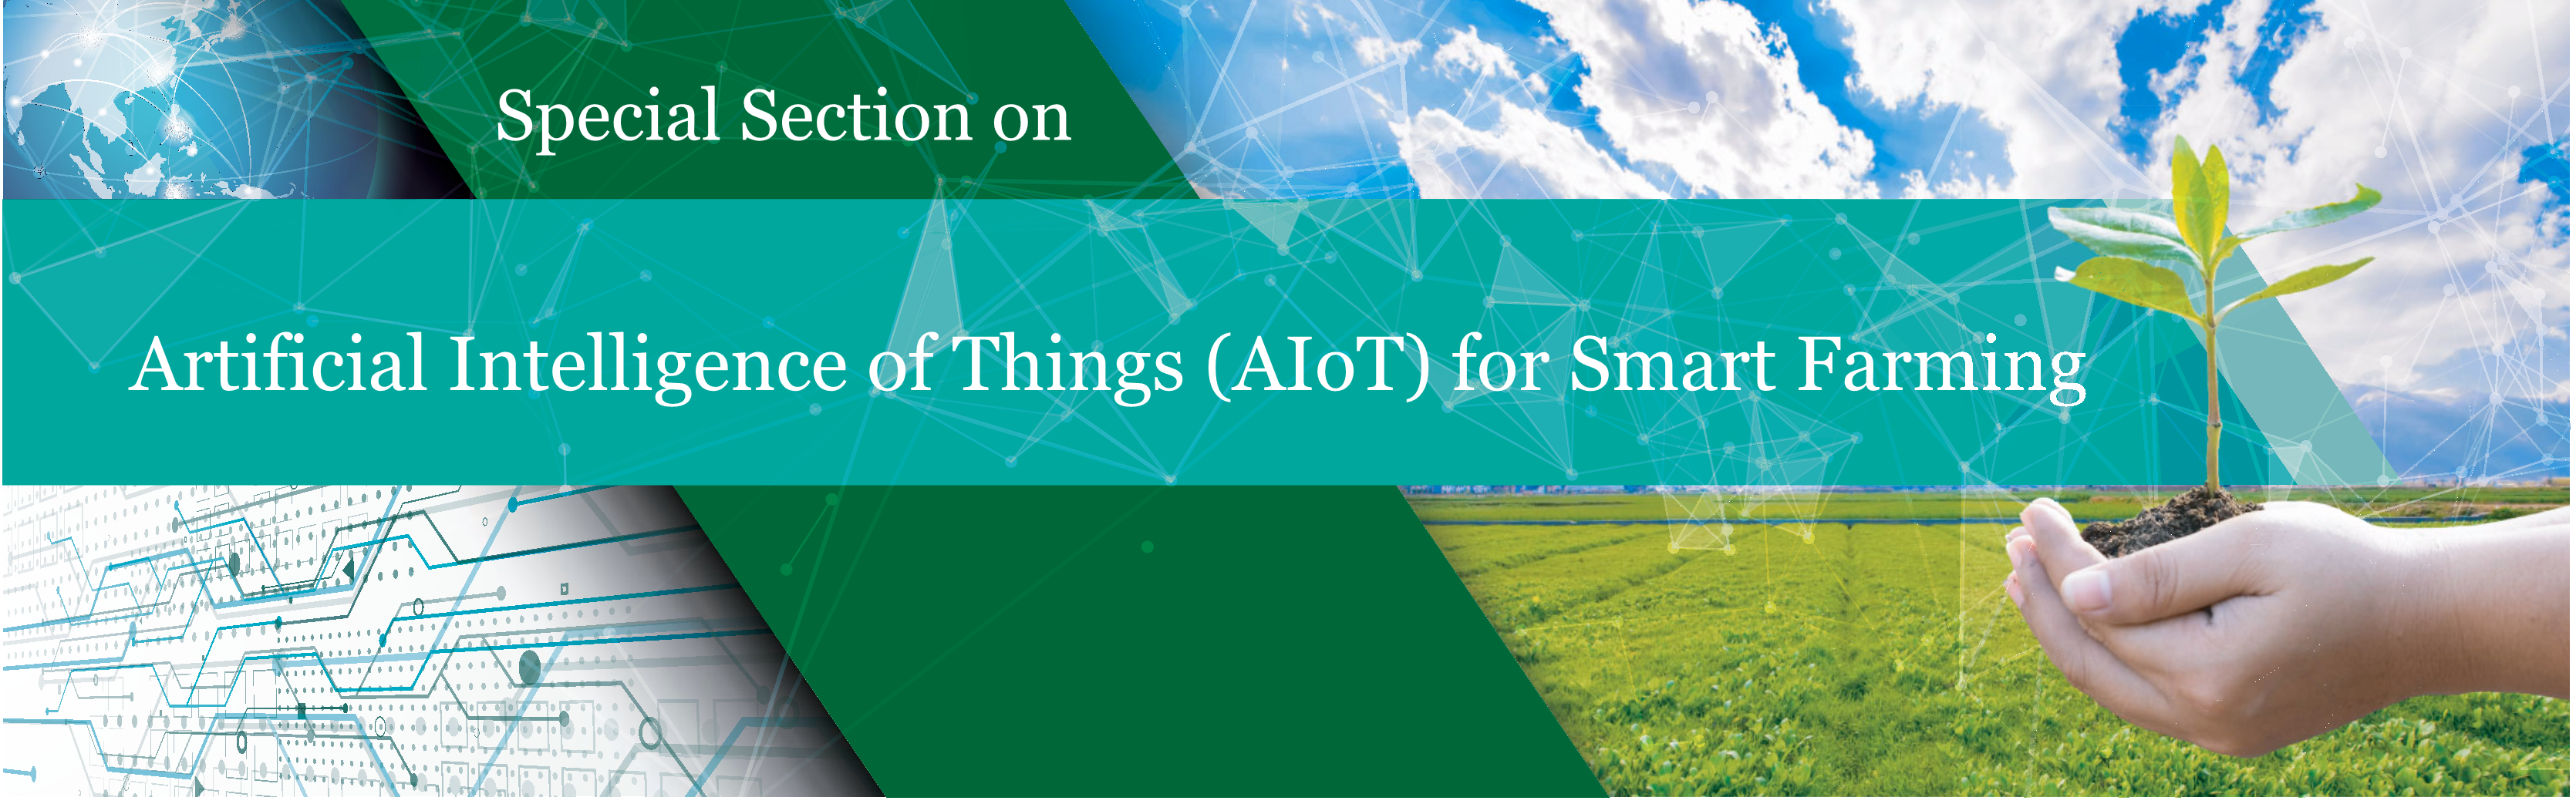 Special Section on Artificial Intelligence of Things (AIoT) for Smart Farming